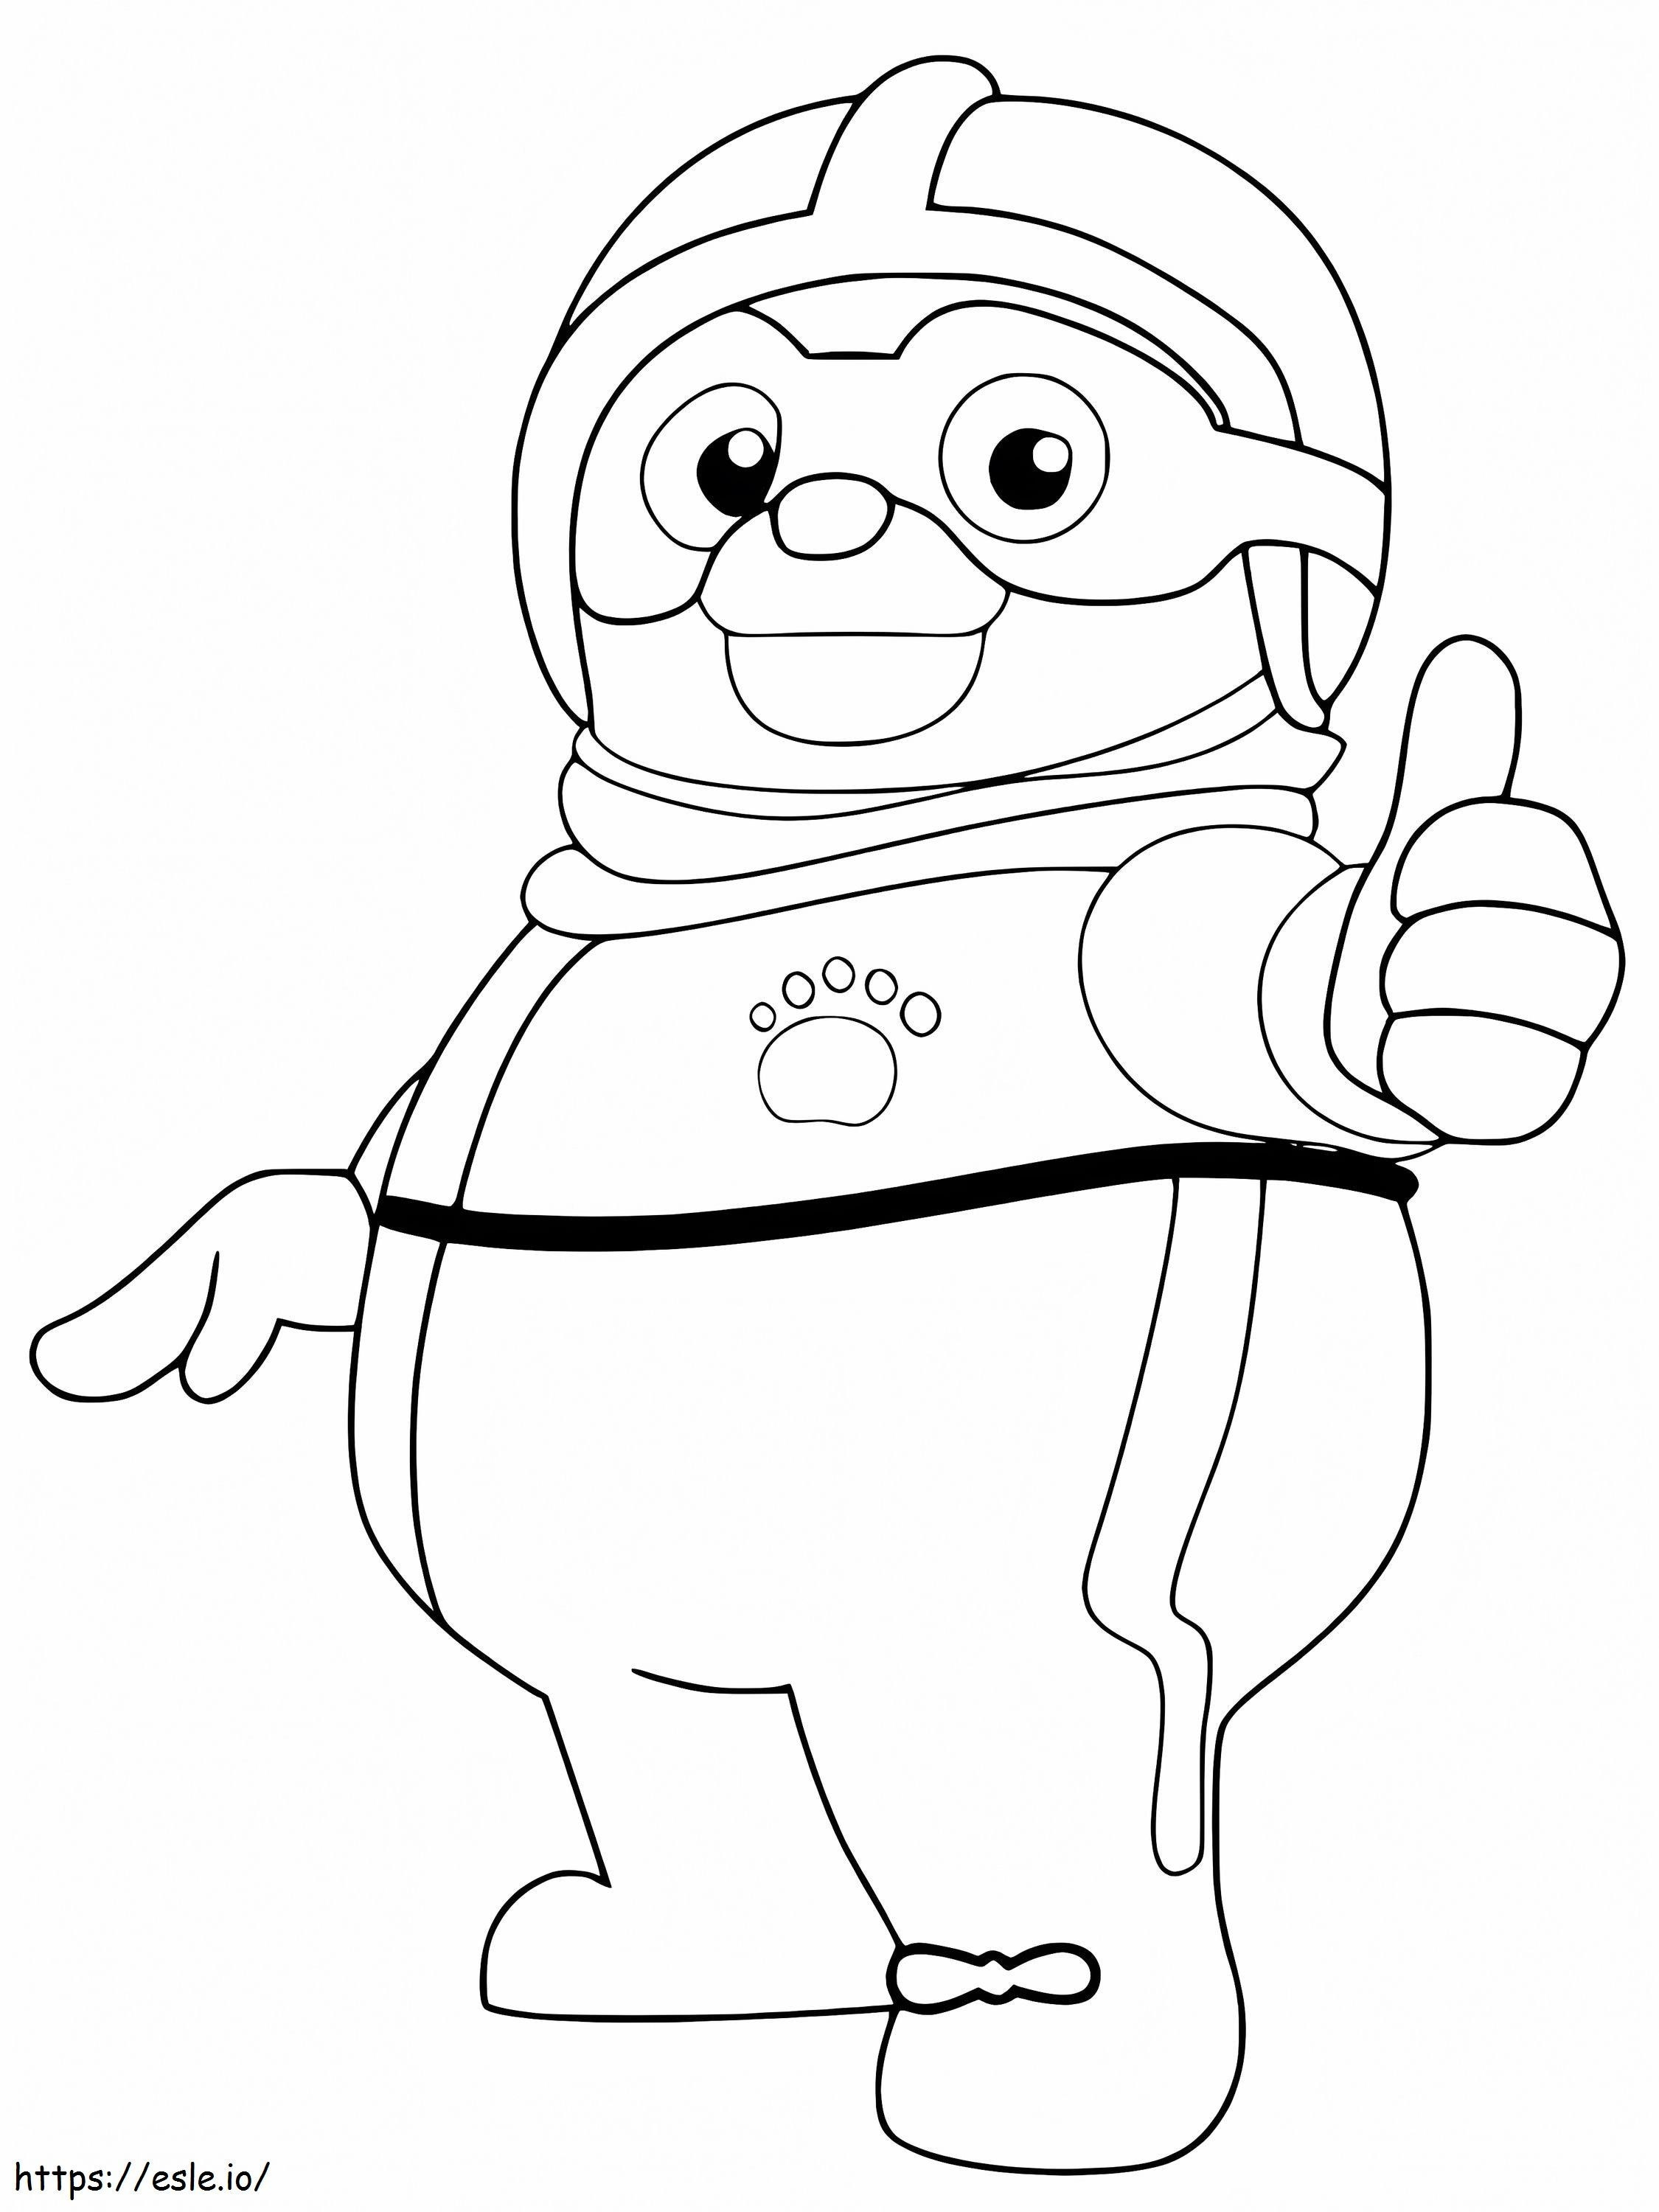 Cool Agent Oso coloring page